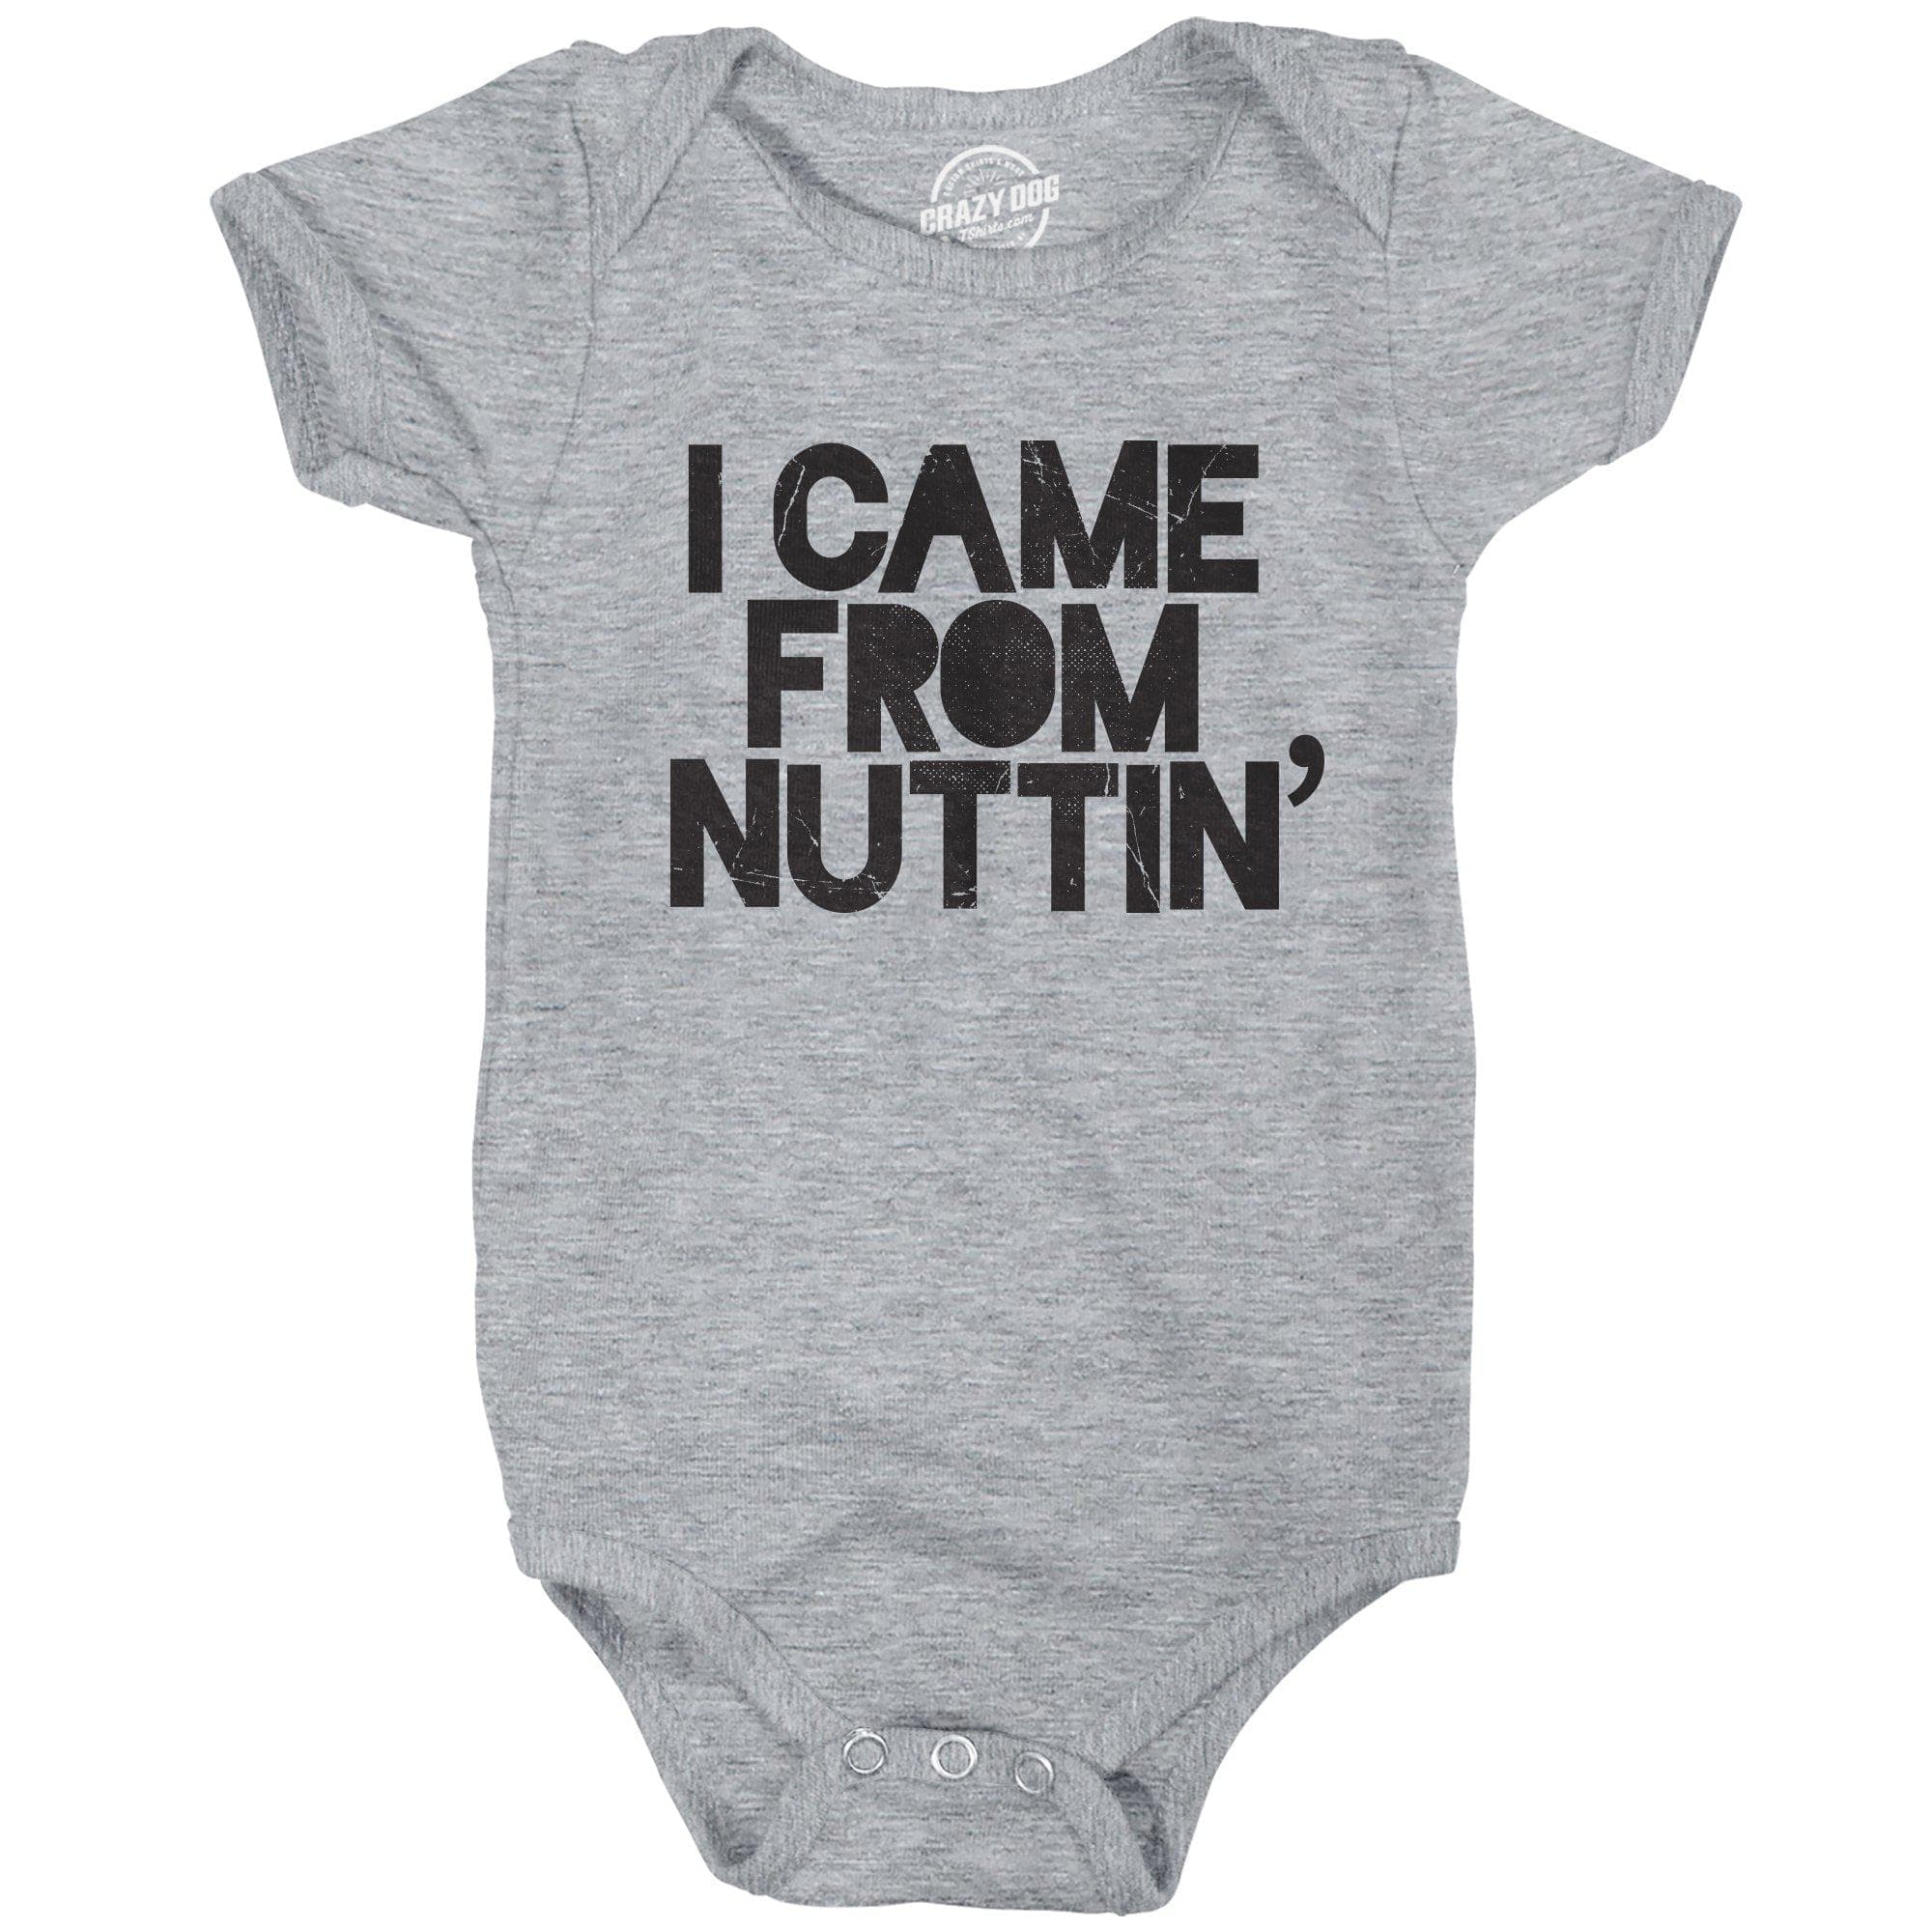 I Came From Nuttin' Baby Bodysuit - Crazy Dog T-Shirts